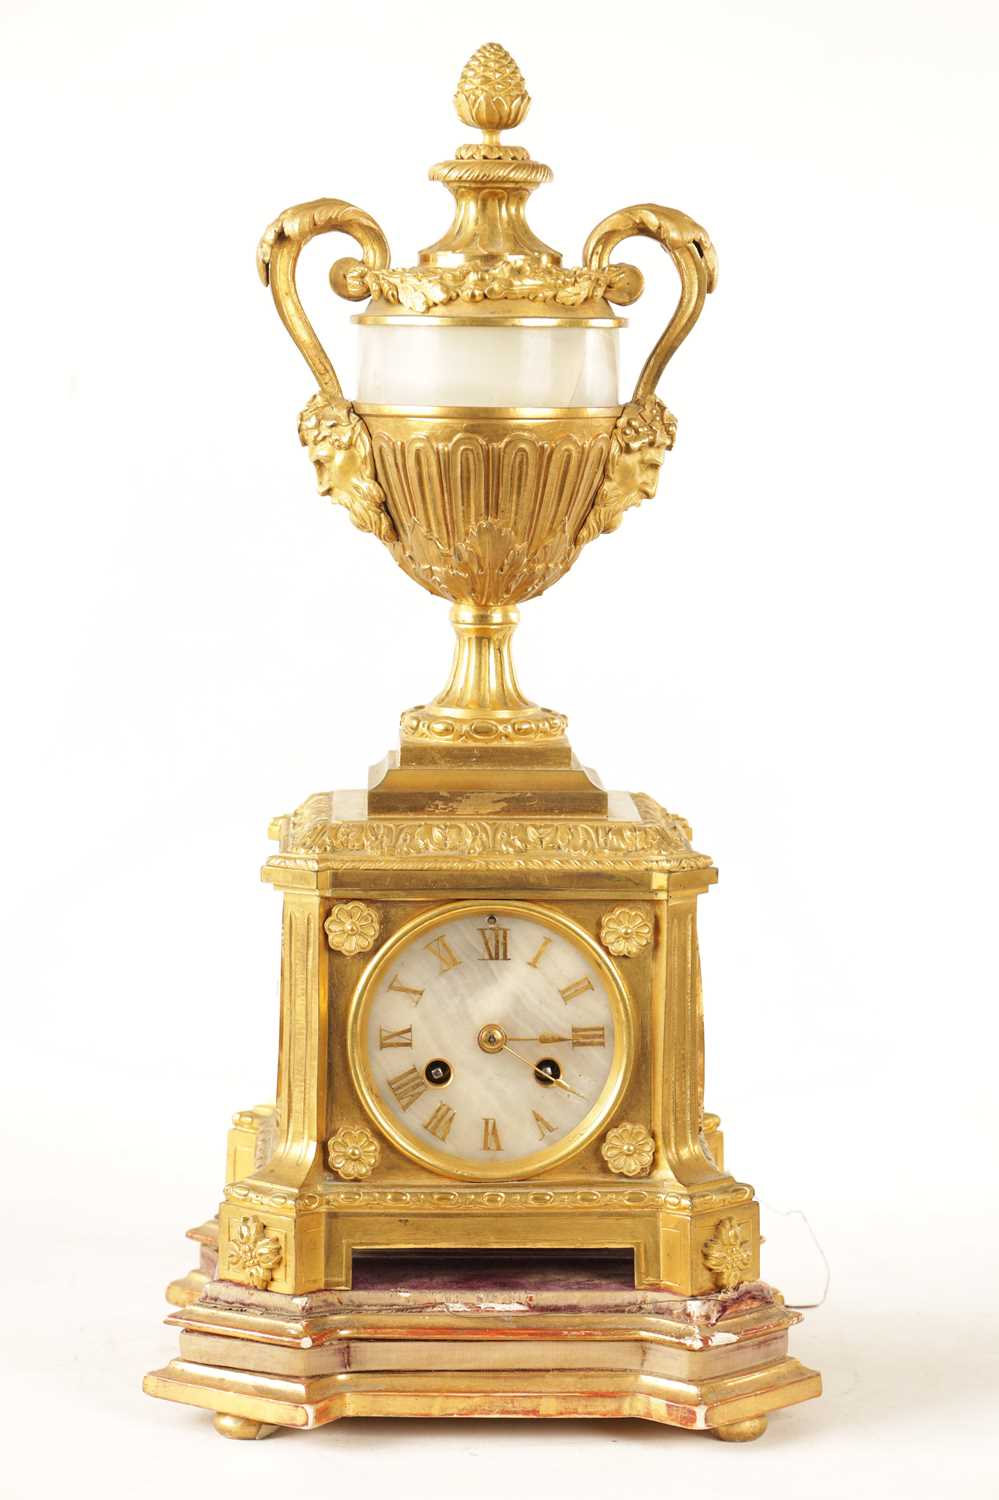 A 19TH CENTURY ORMOLU AND ONYX PANELLED MANTEL CLOCK - Image 2 of 11